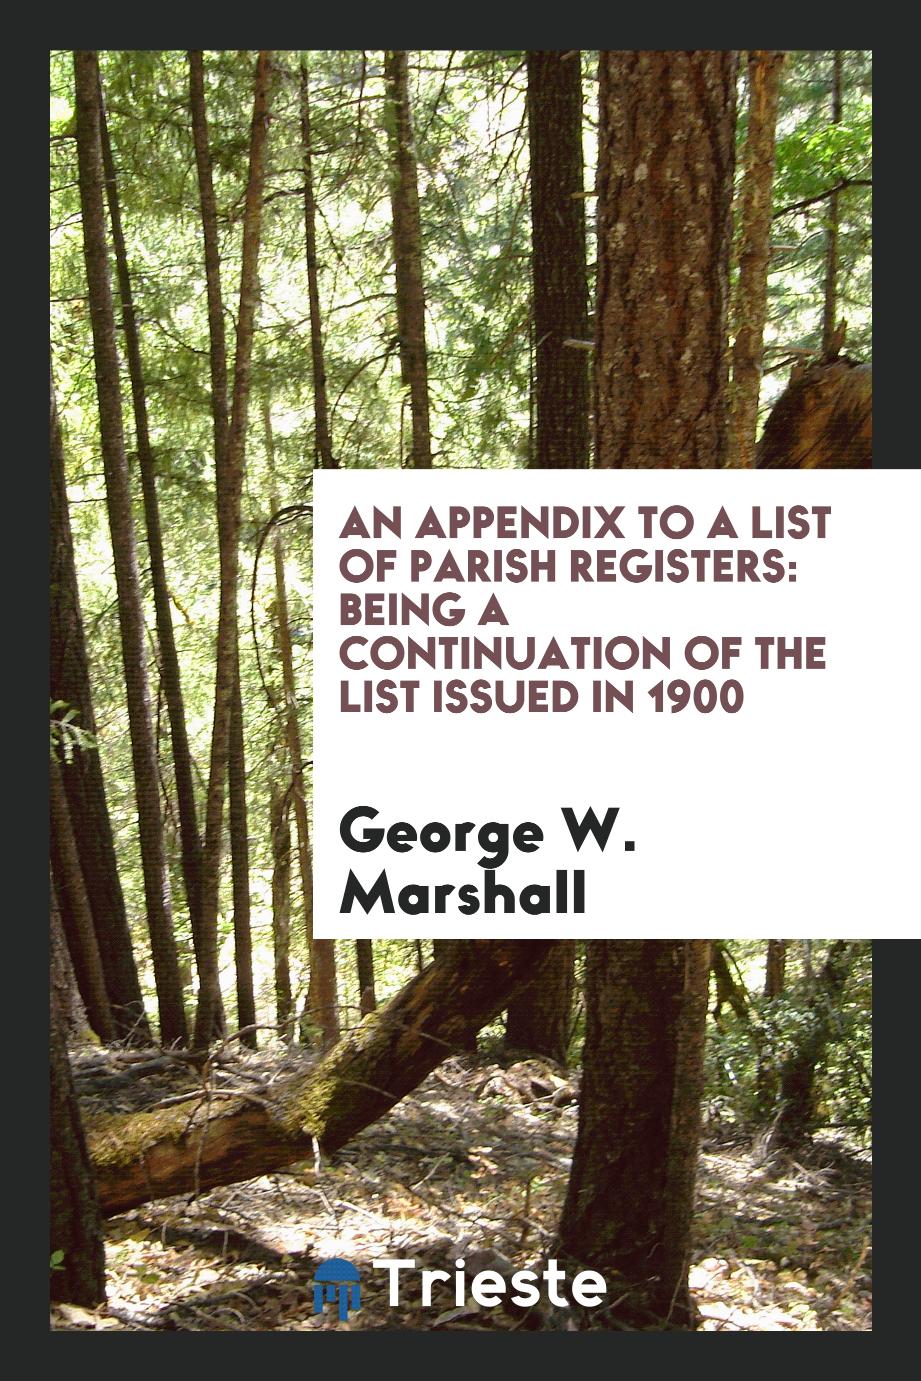 An appendix to a list of Parish Registers: being a continuation of the list issued in 1900